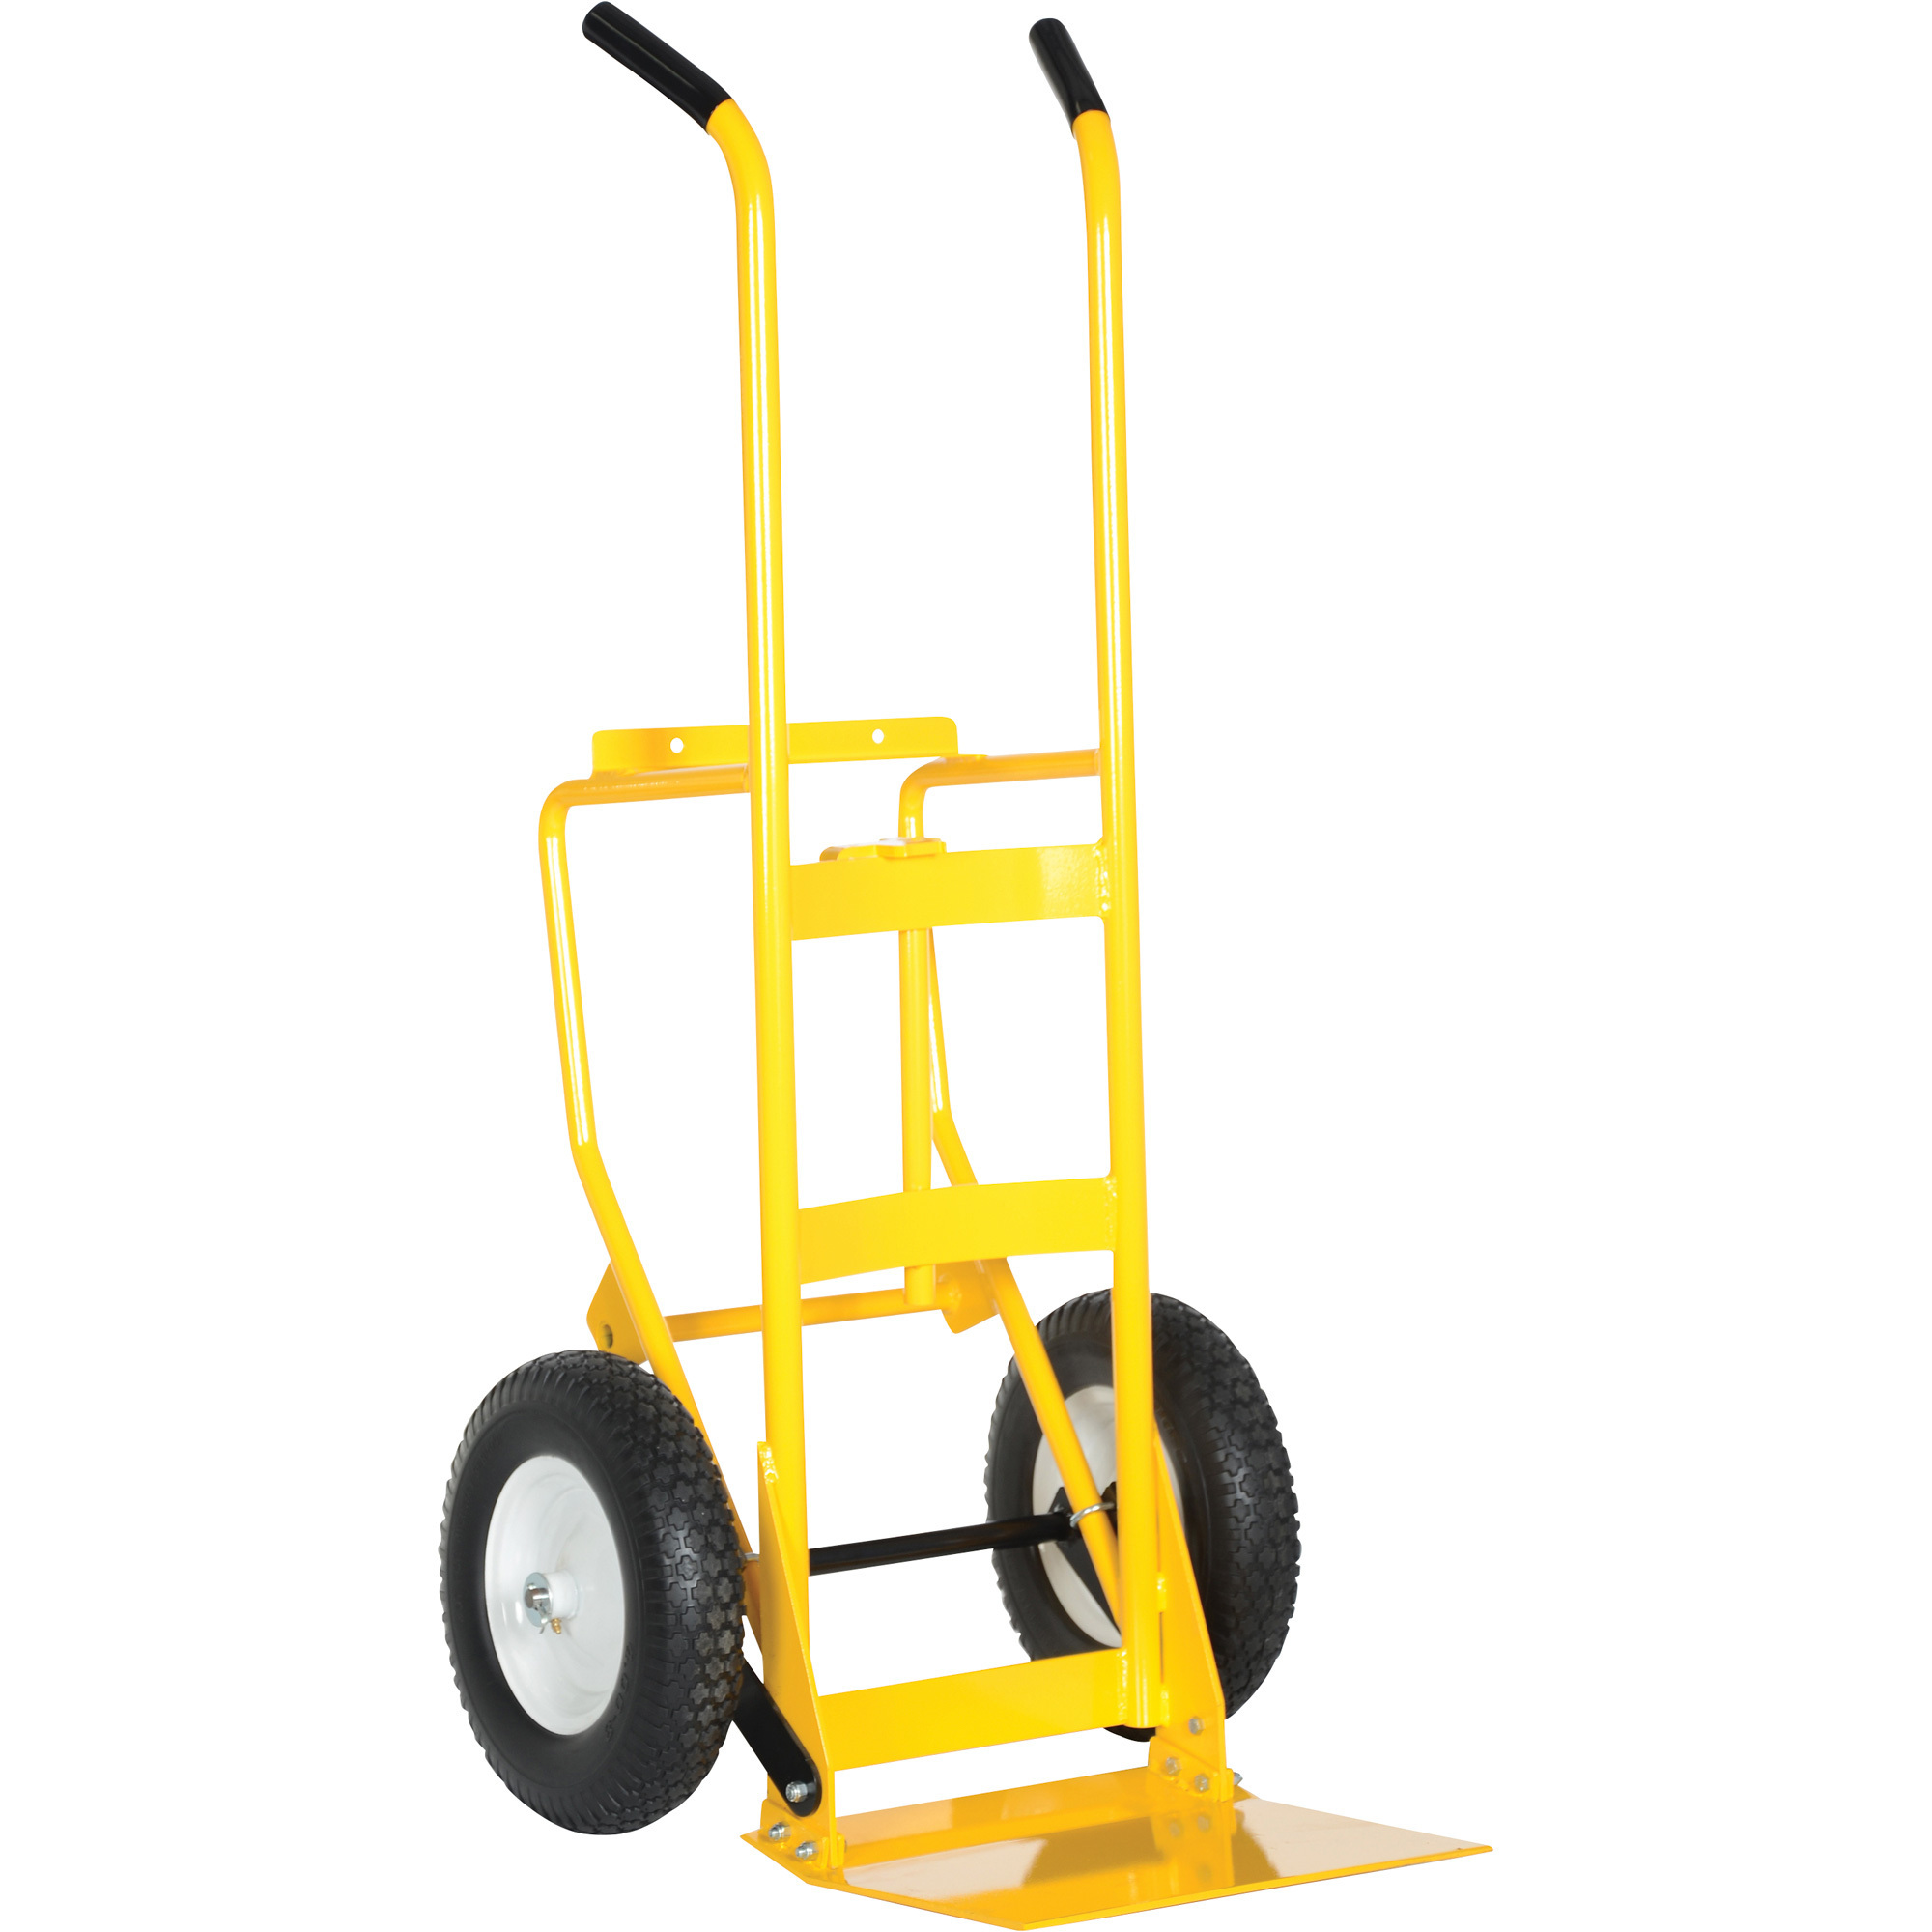 Vestil Multi-Purpose Drum and Hand Truck with Pneumatic Tires, 500-Lb. Capacity, Model DCHT-1